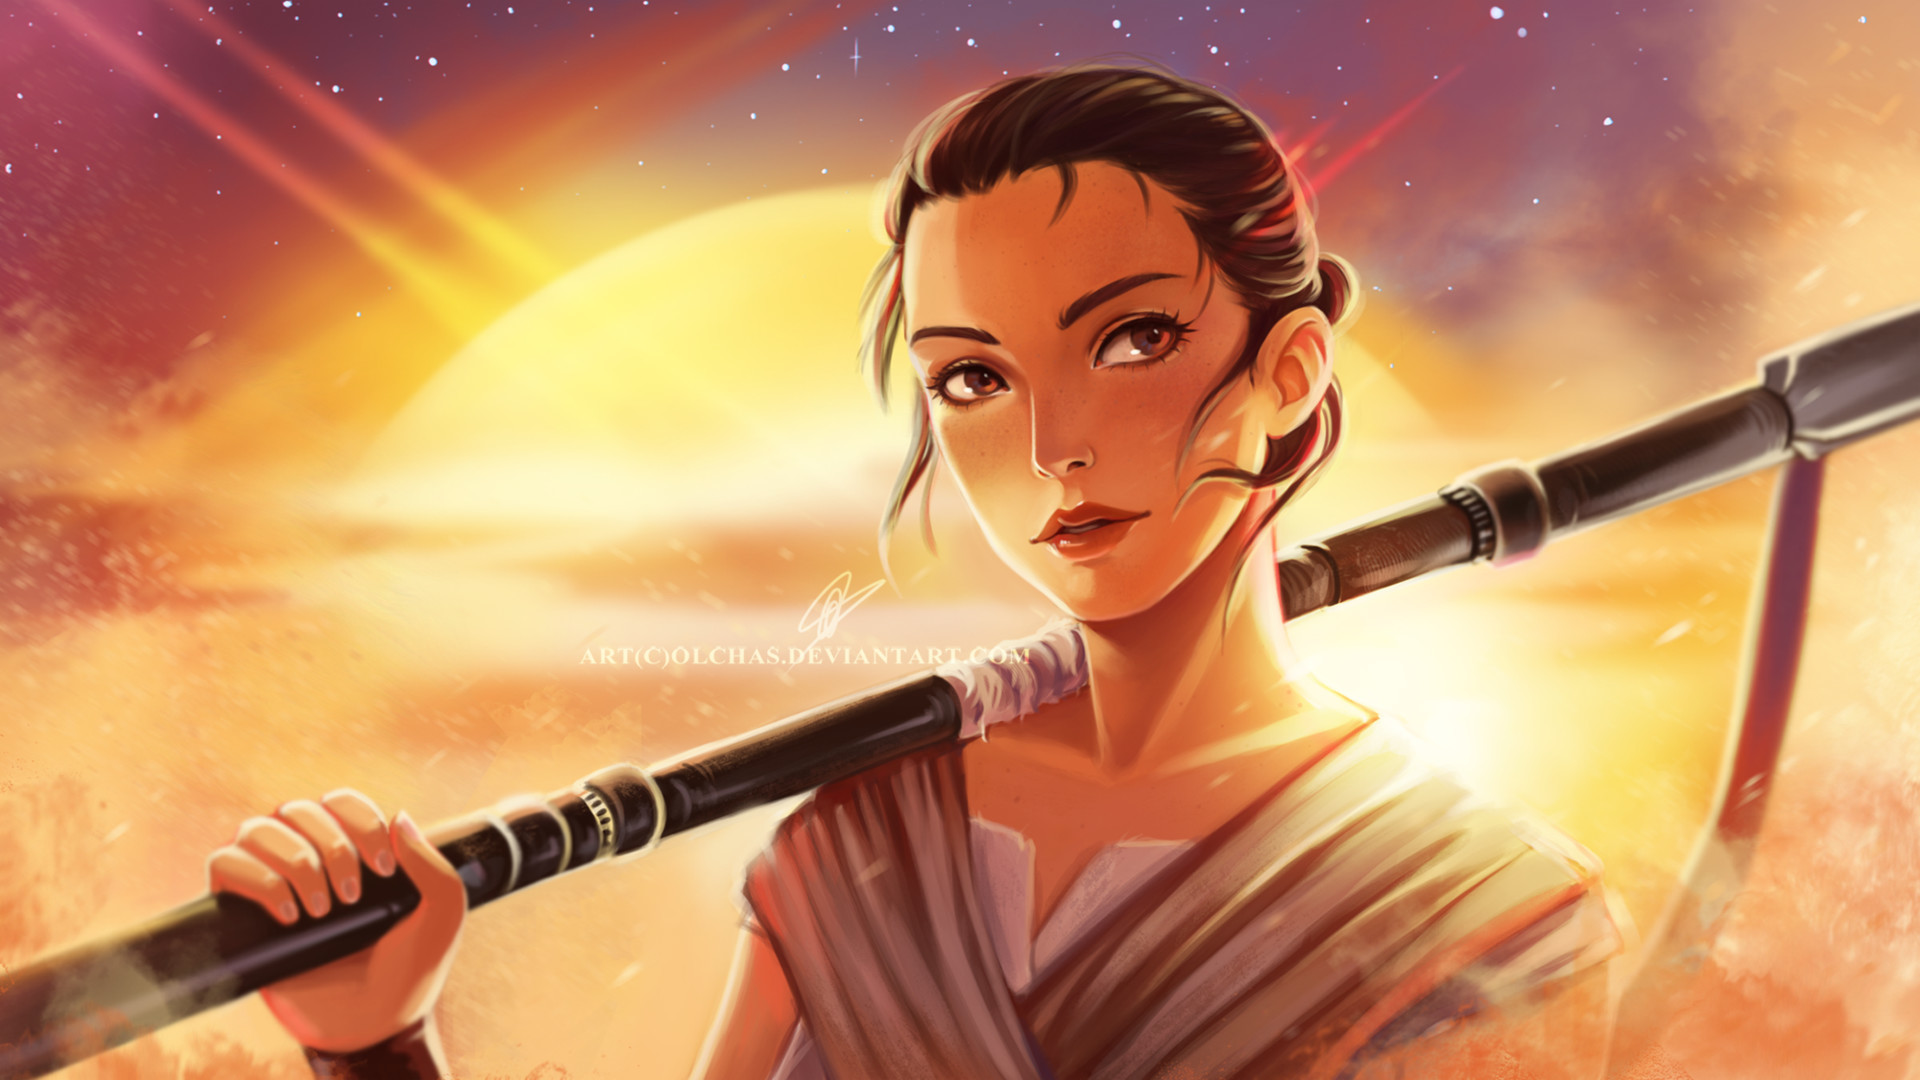 1920x1080 Rey Jedi Background Pictures to Pin on Pinterest - PinsDaddy